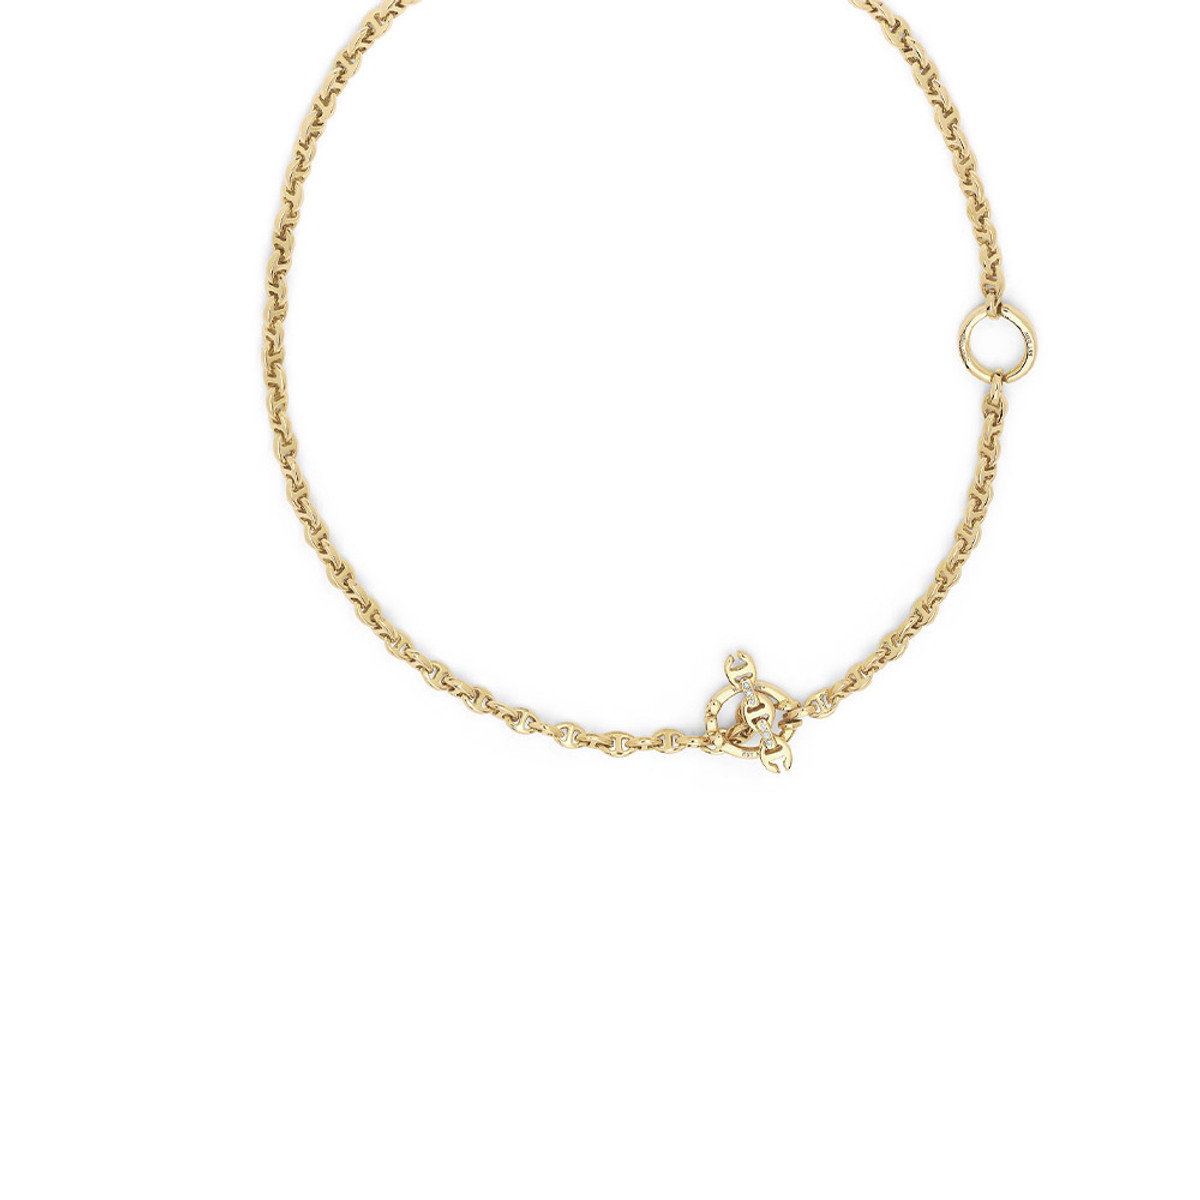 Hoorsenbuhs 18K Yellow Gold Open- Link Necklace with Diamond Toggle- 22"-57477